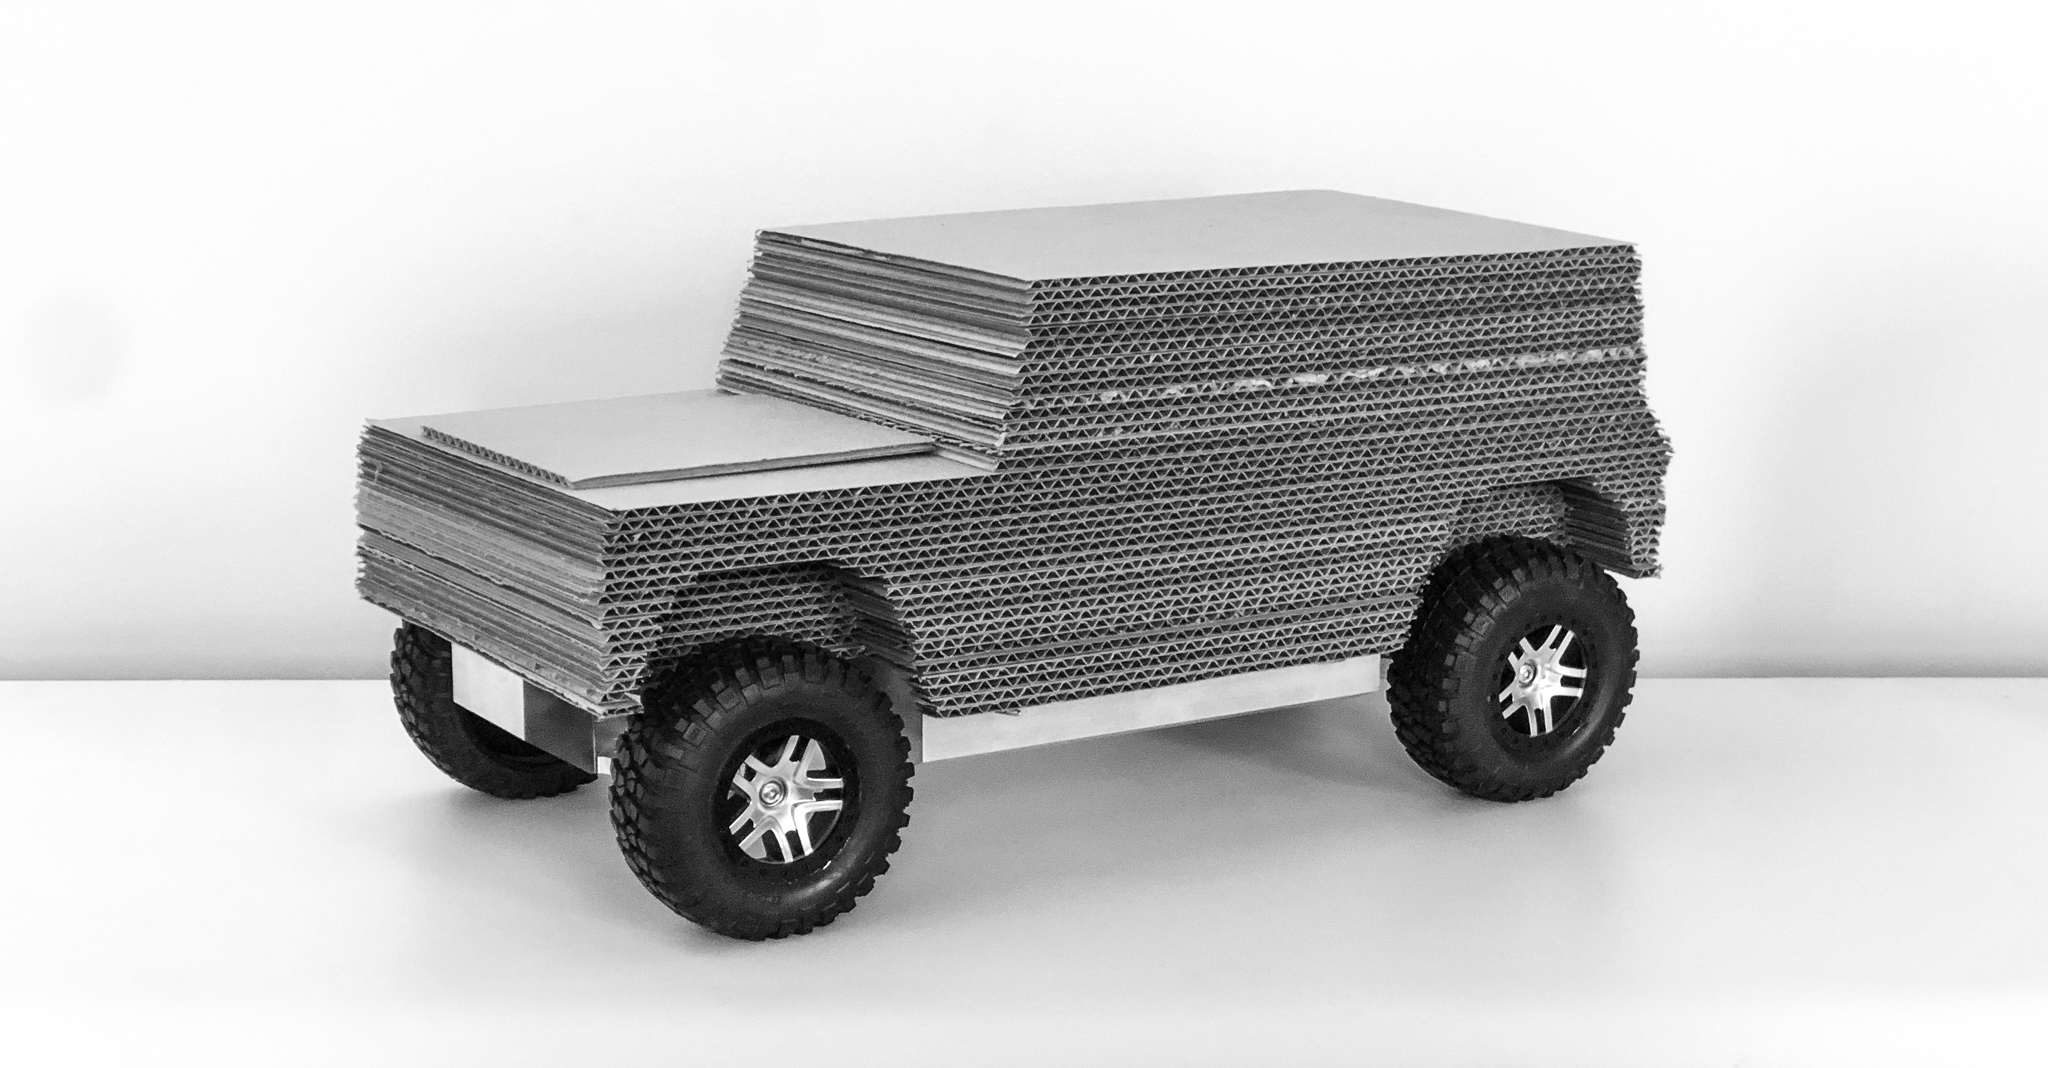 Cardboard model of the Bollinger B1 two door truck made by Robert Bollinger in the first year of business.